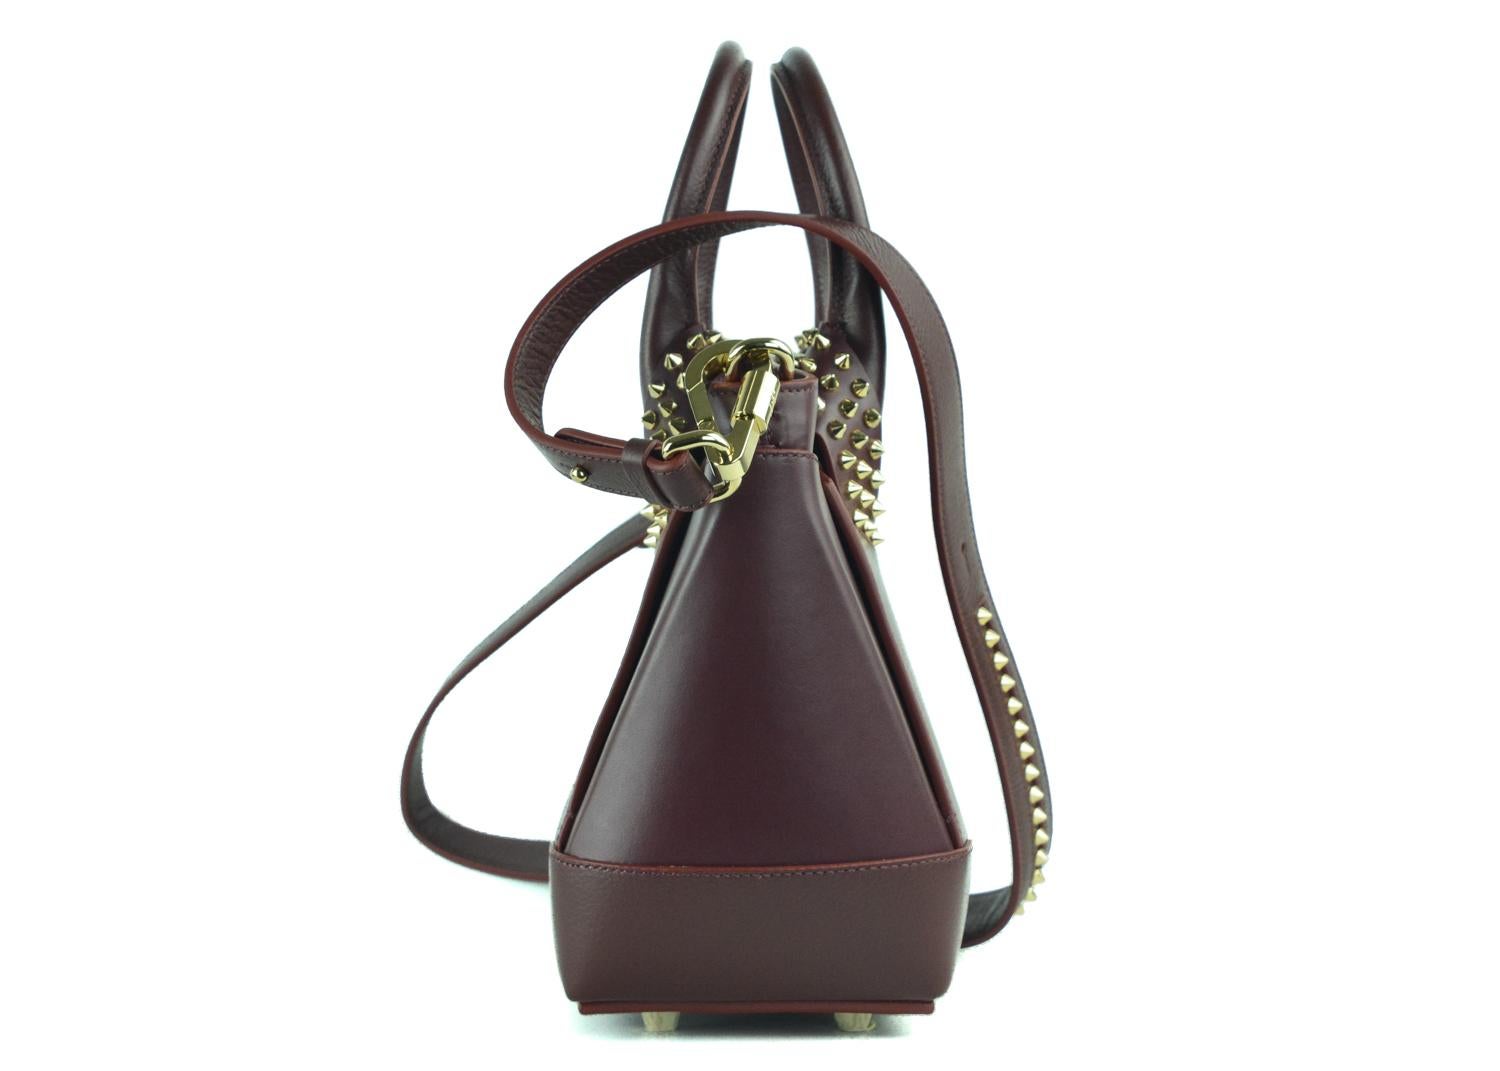 Christian Louboutin’s Eloise bag is crafted in Italy from grained calf leather in a rich burgundy hue – complemented beautifully by the signature gold-tone spikes. This structured style has plenty of space for your wallet, smartphone, and make-up